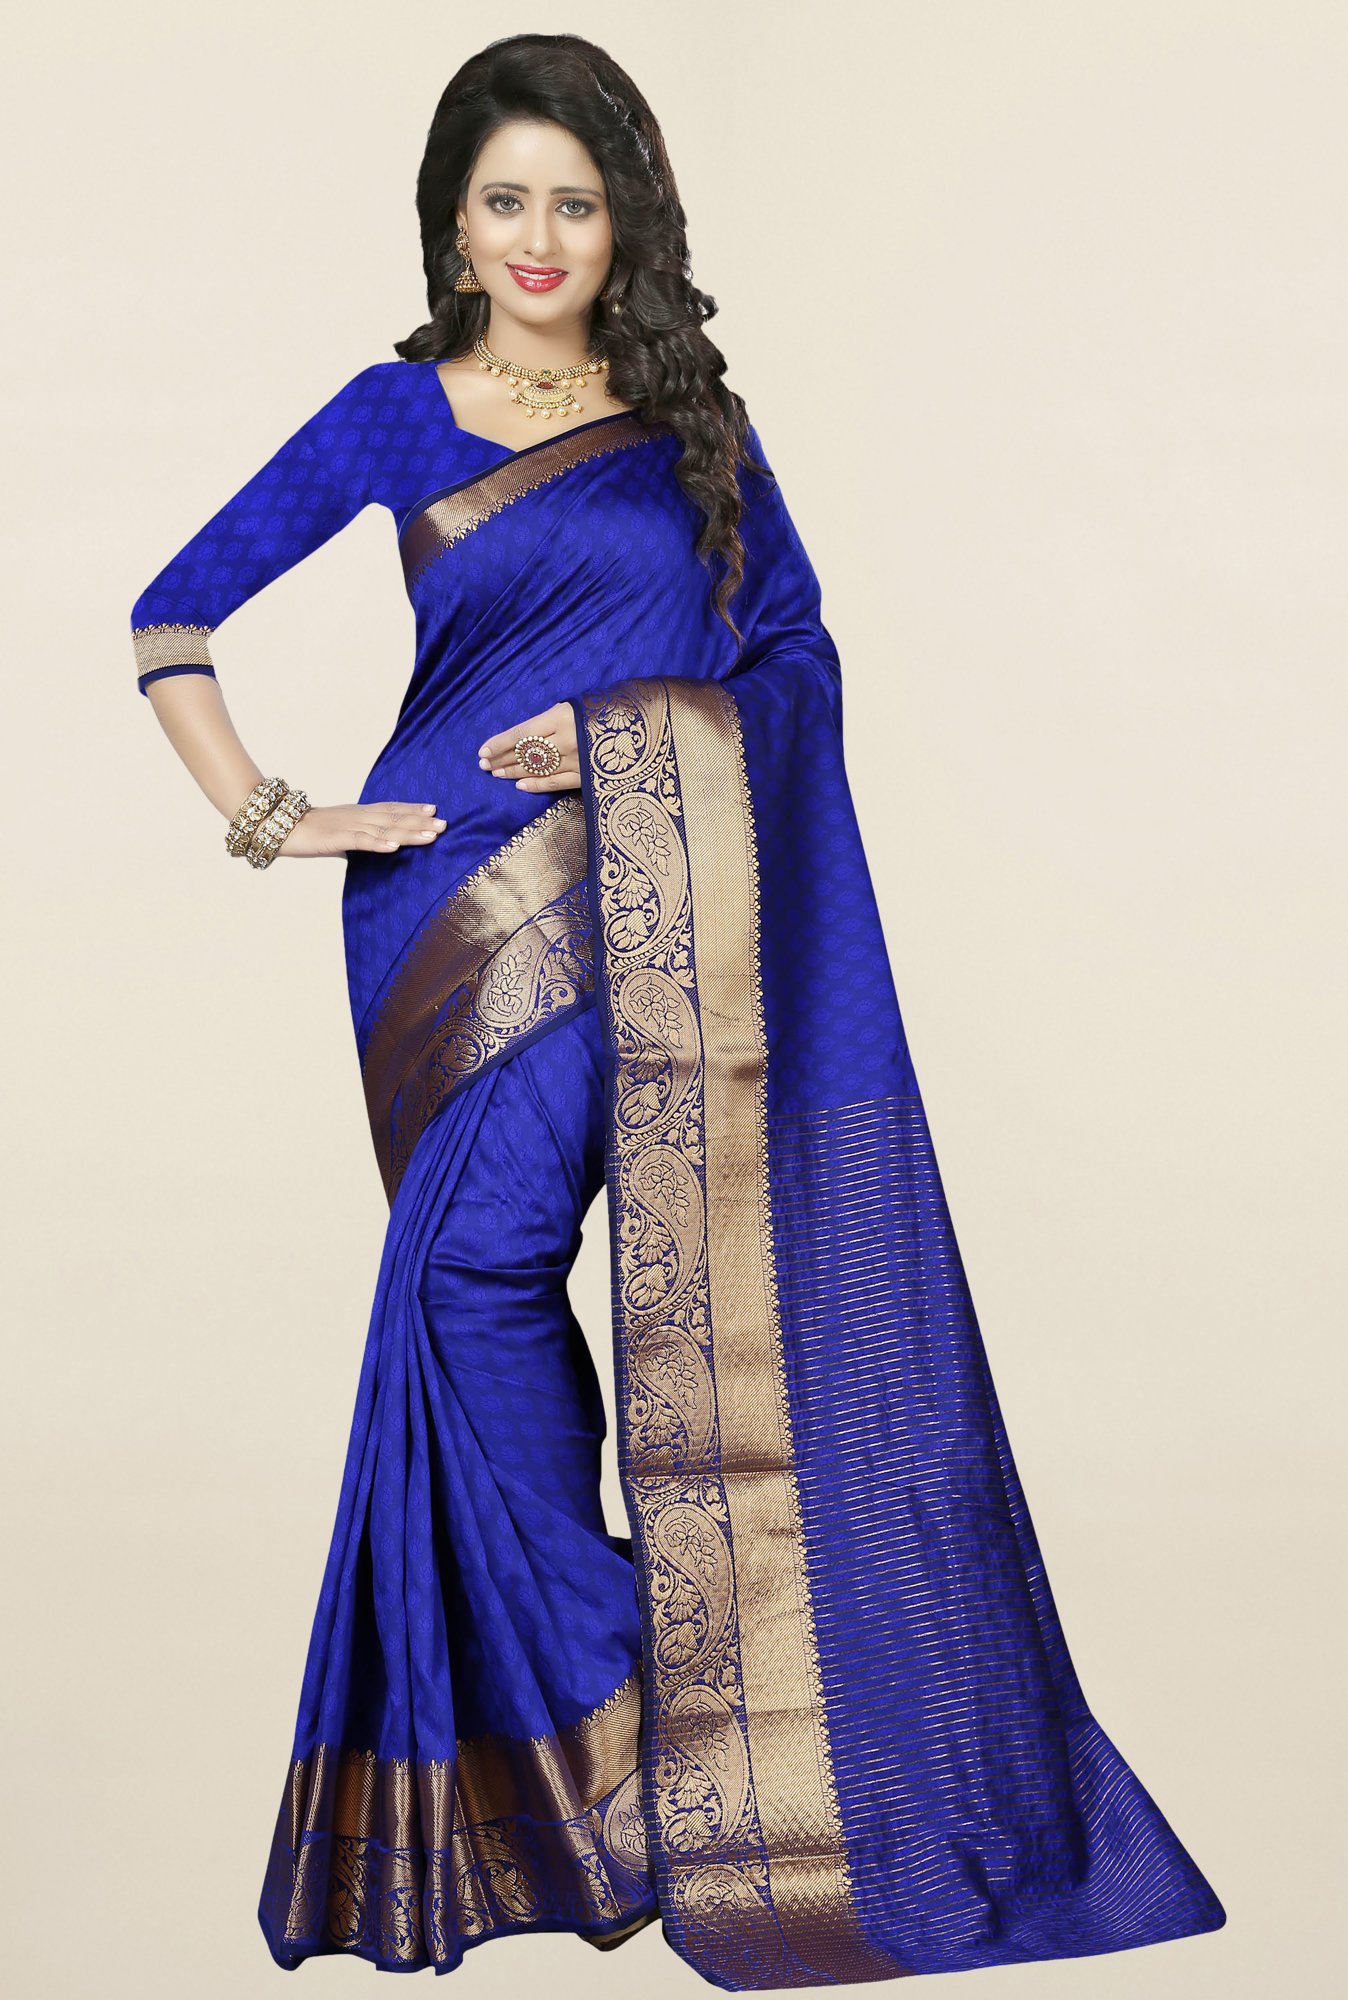 20 Types Of Sarees For Every Woman To Own! - Baggout